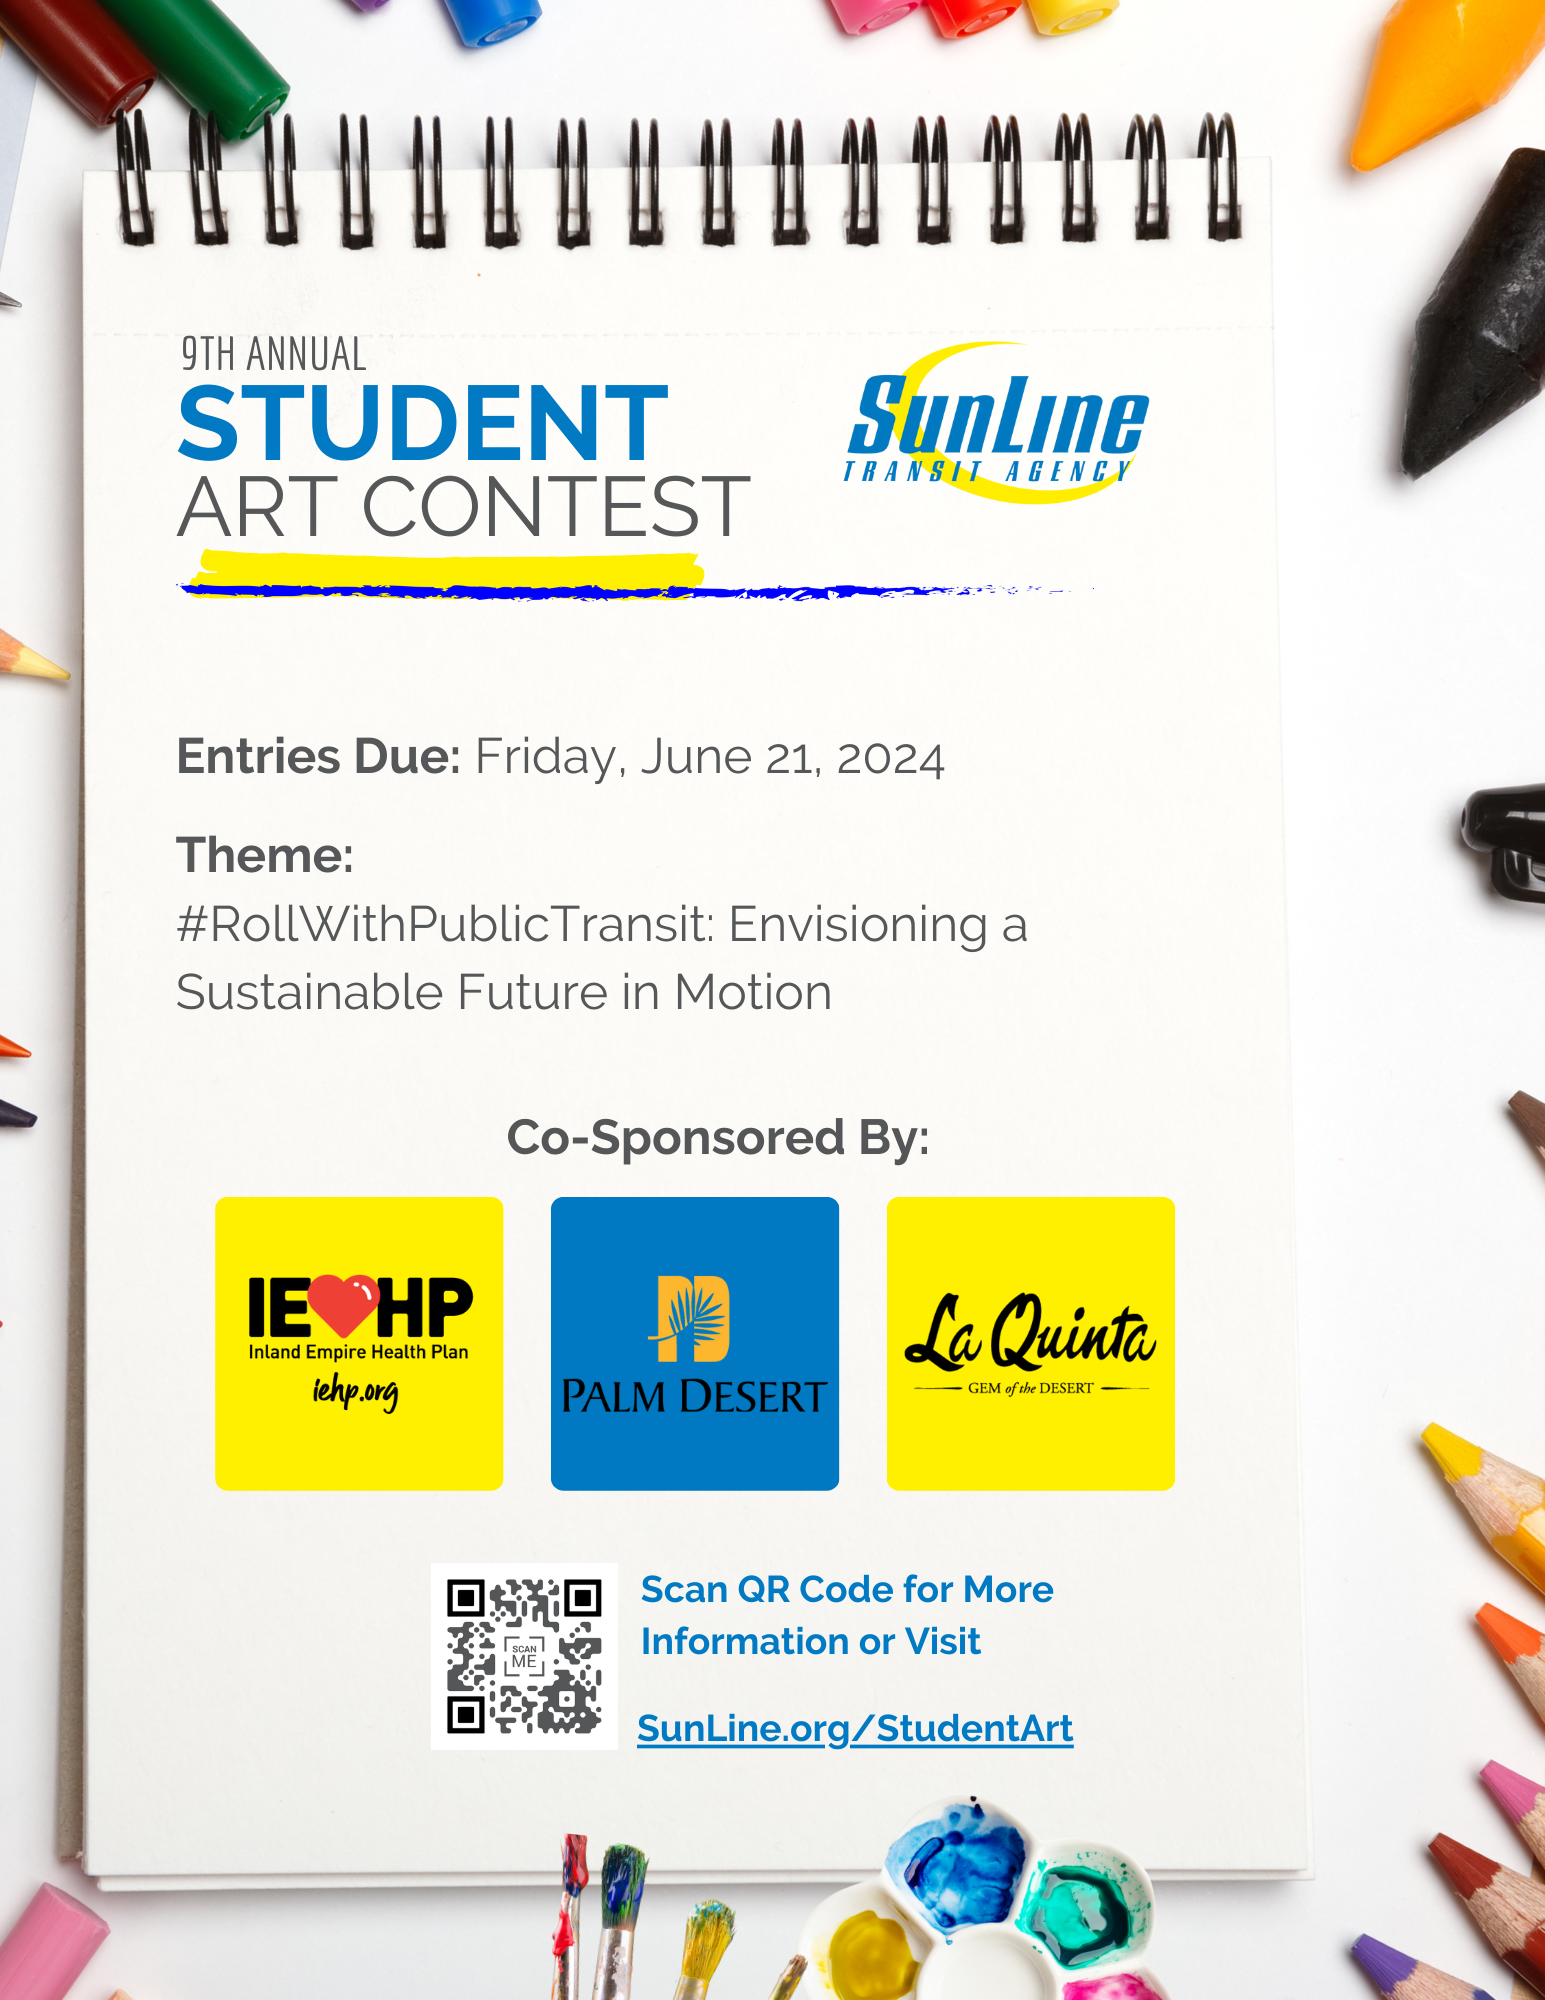 Flyer of 9th annual student art contest with the theme and sponsors and a qr code and link for art submission